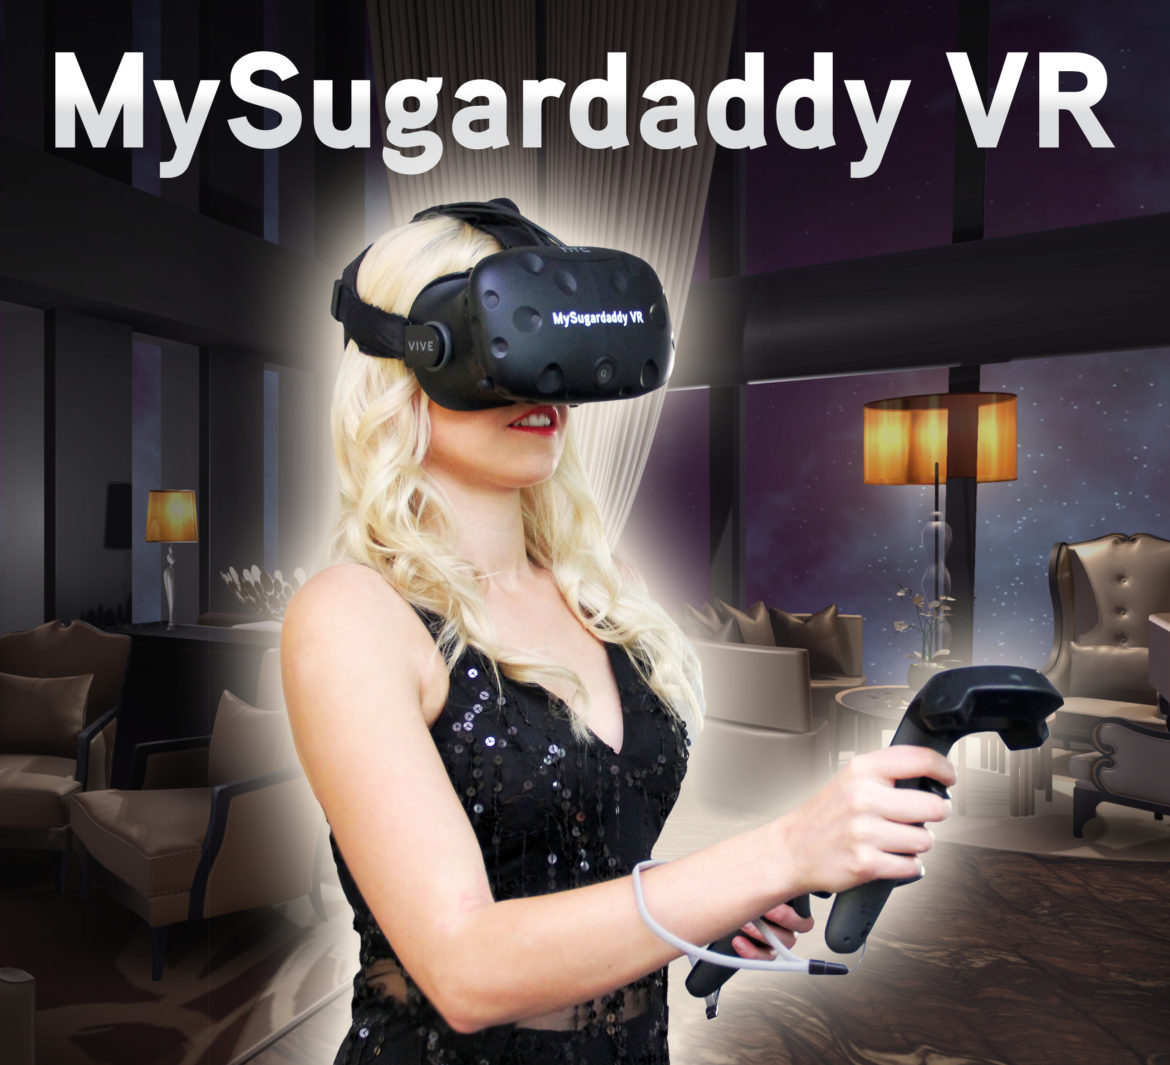 World’s first virtual reality dating – Out now in the USA!